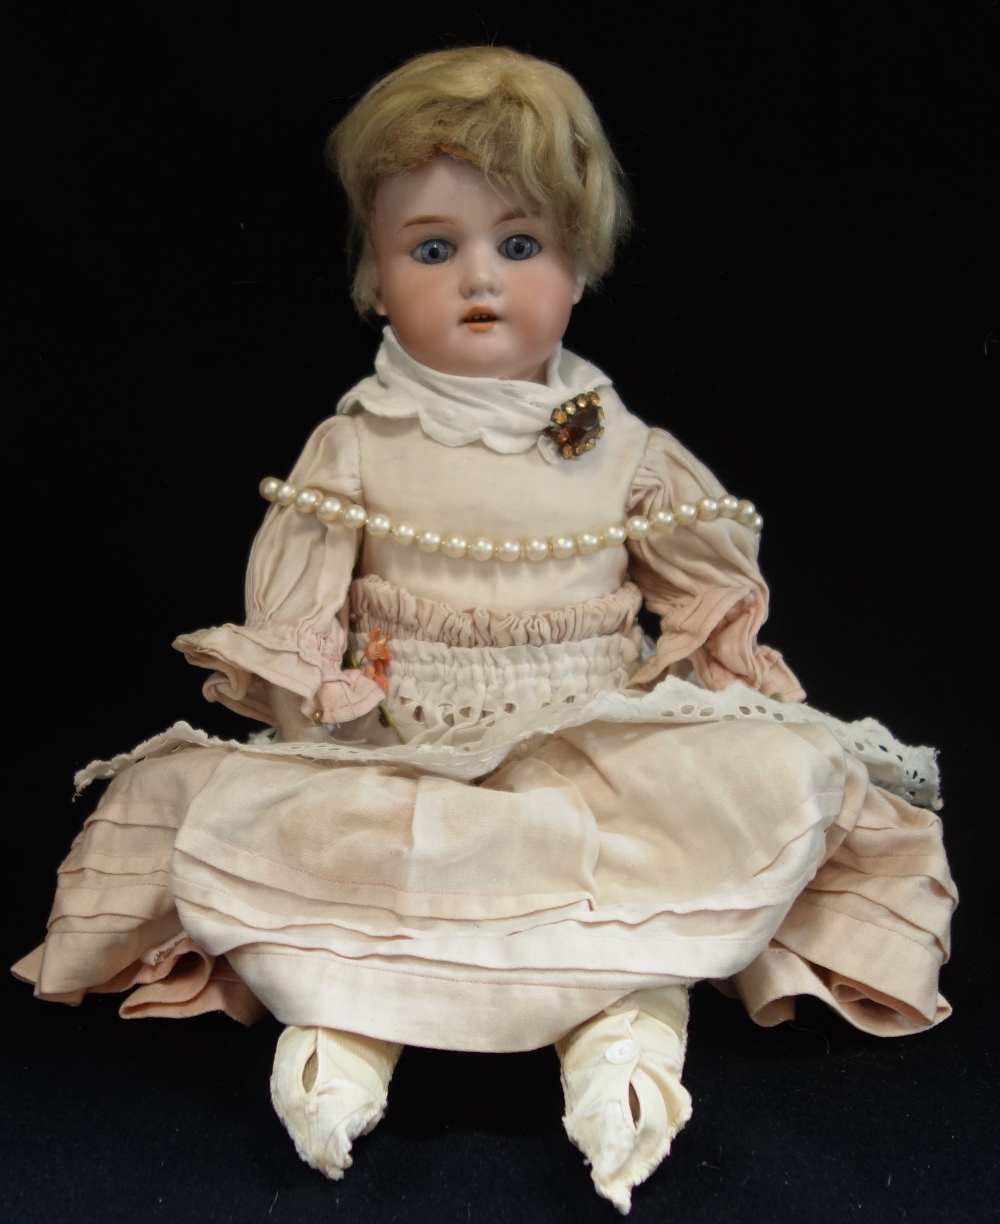 ARMAND MARSEILLE; AN EARLY 20TH CENTURY BISQUE DOLL, stamped, '370 A.M.0 1/2 D.E.' with composite